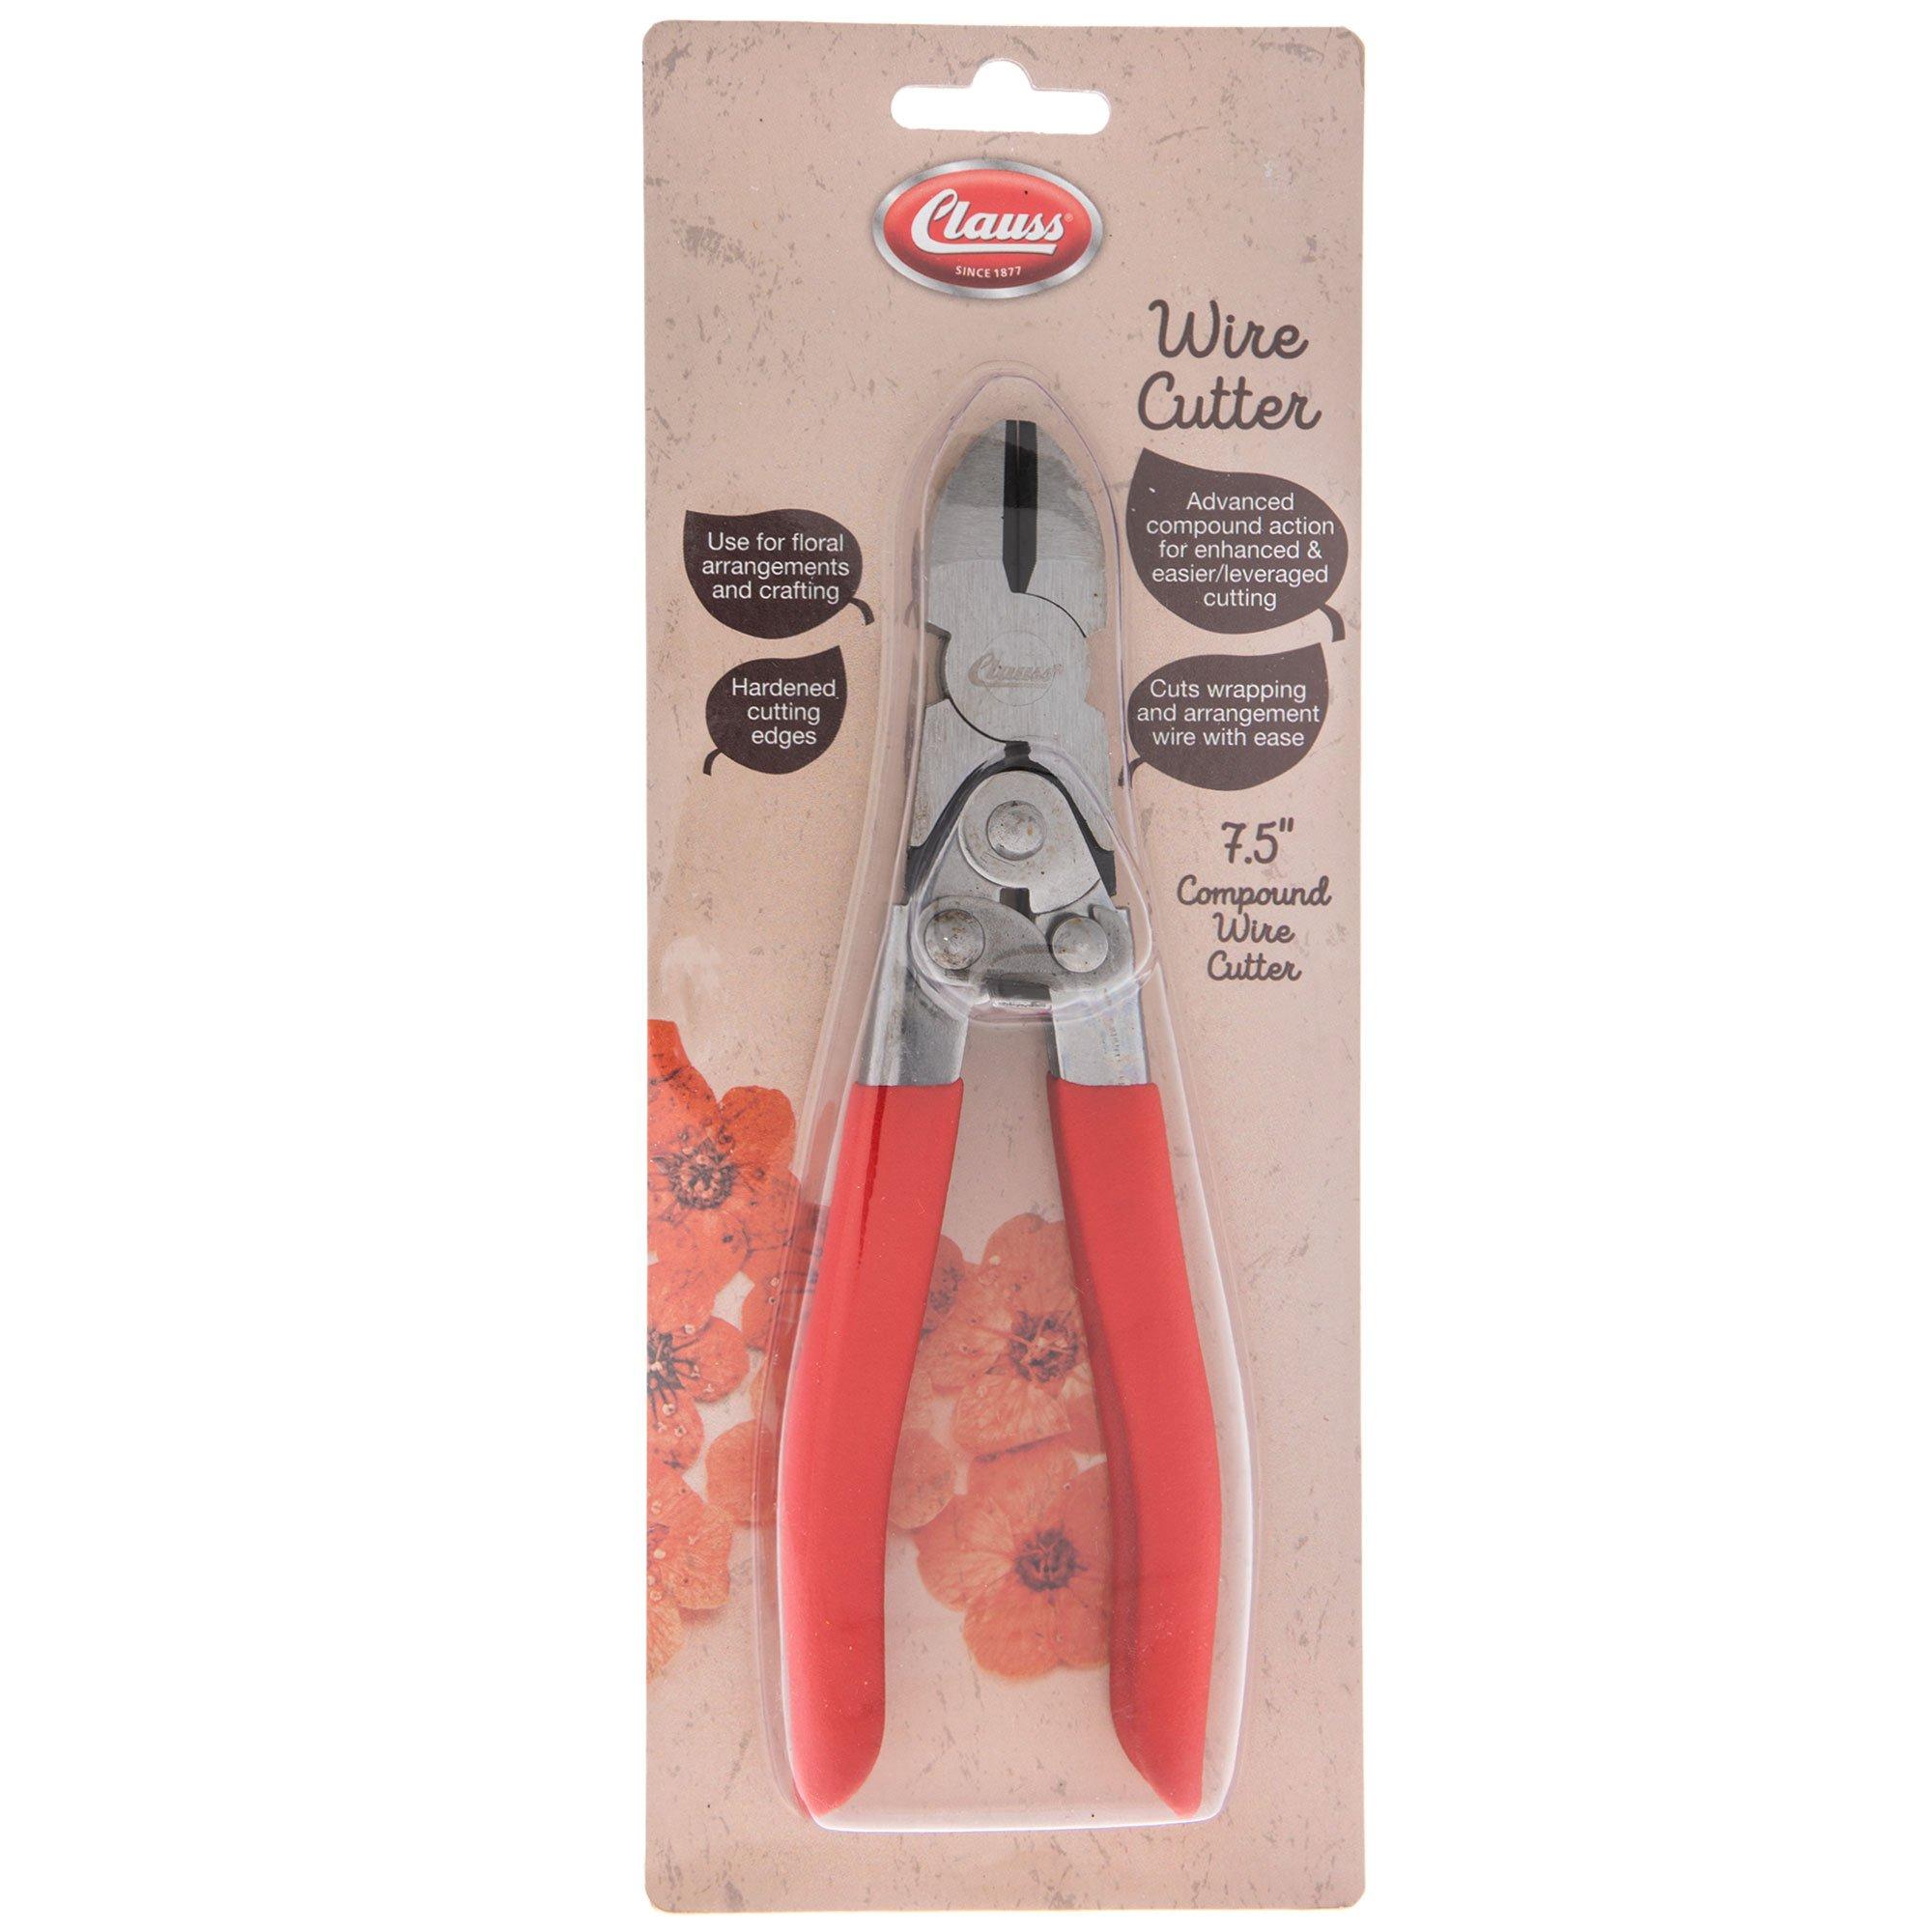 Floral Wire Cutter - 6.5 Heavy Duty